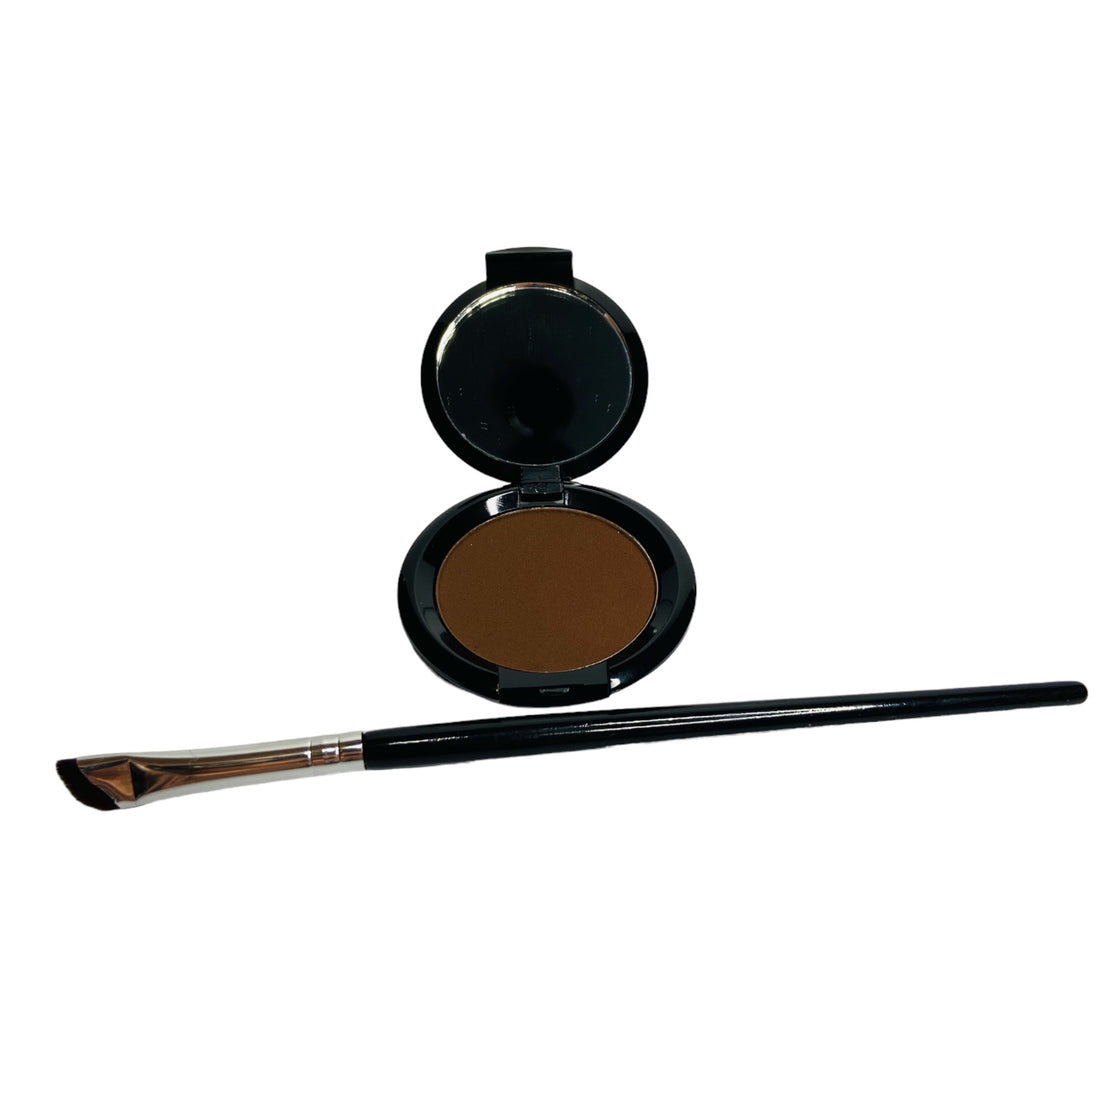 Shadow Liner Brush With Espresso Matte Shadow for the perfect line every time!  NEW!